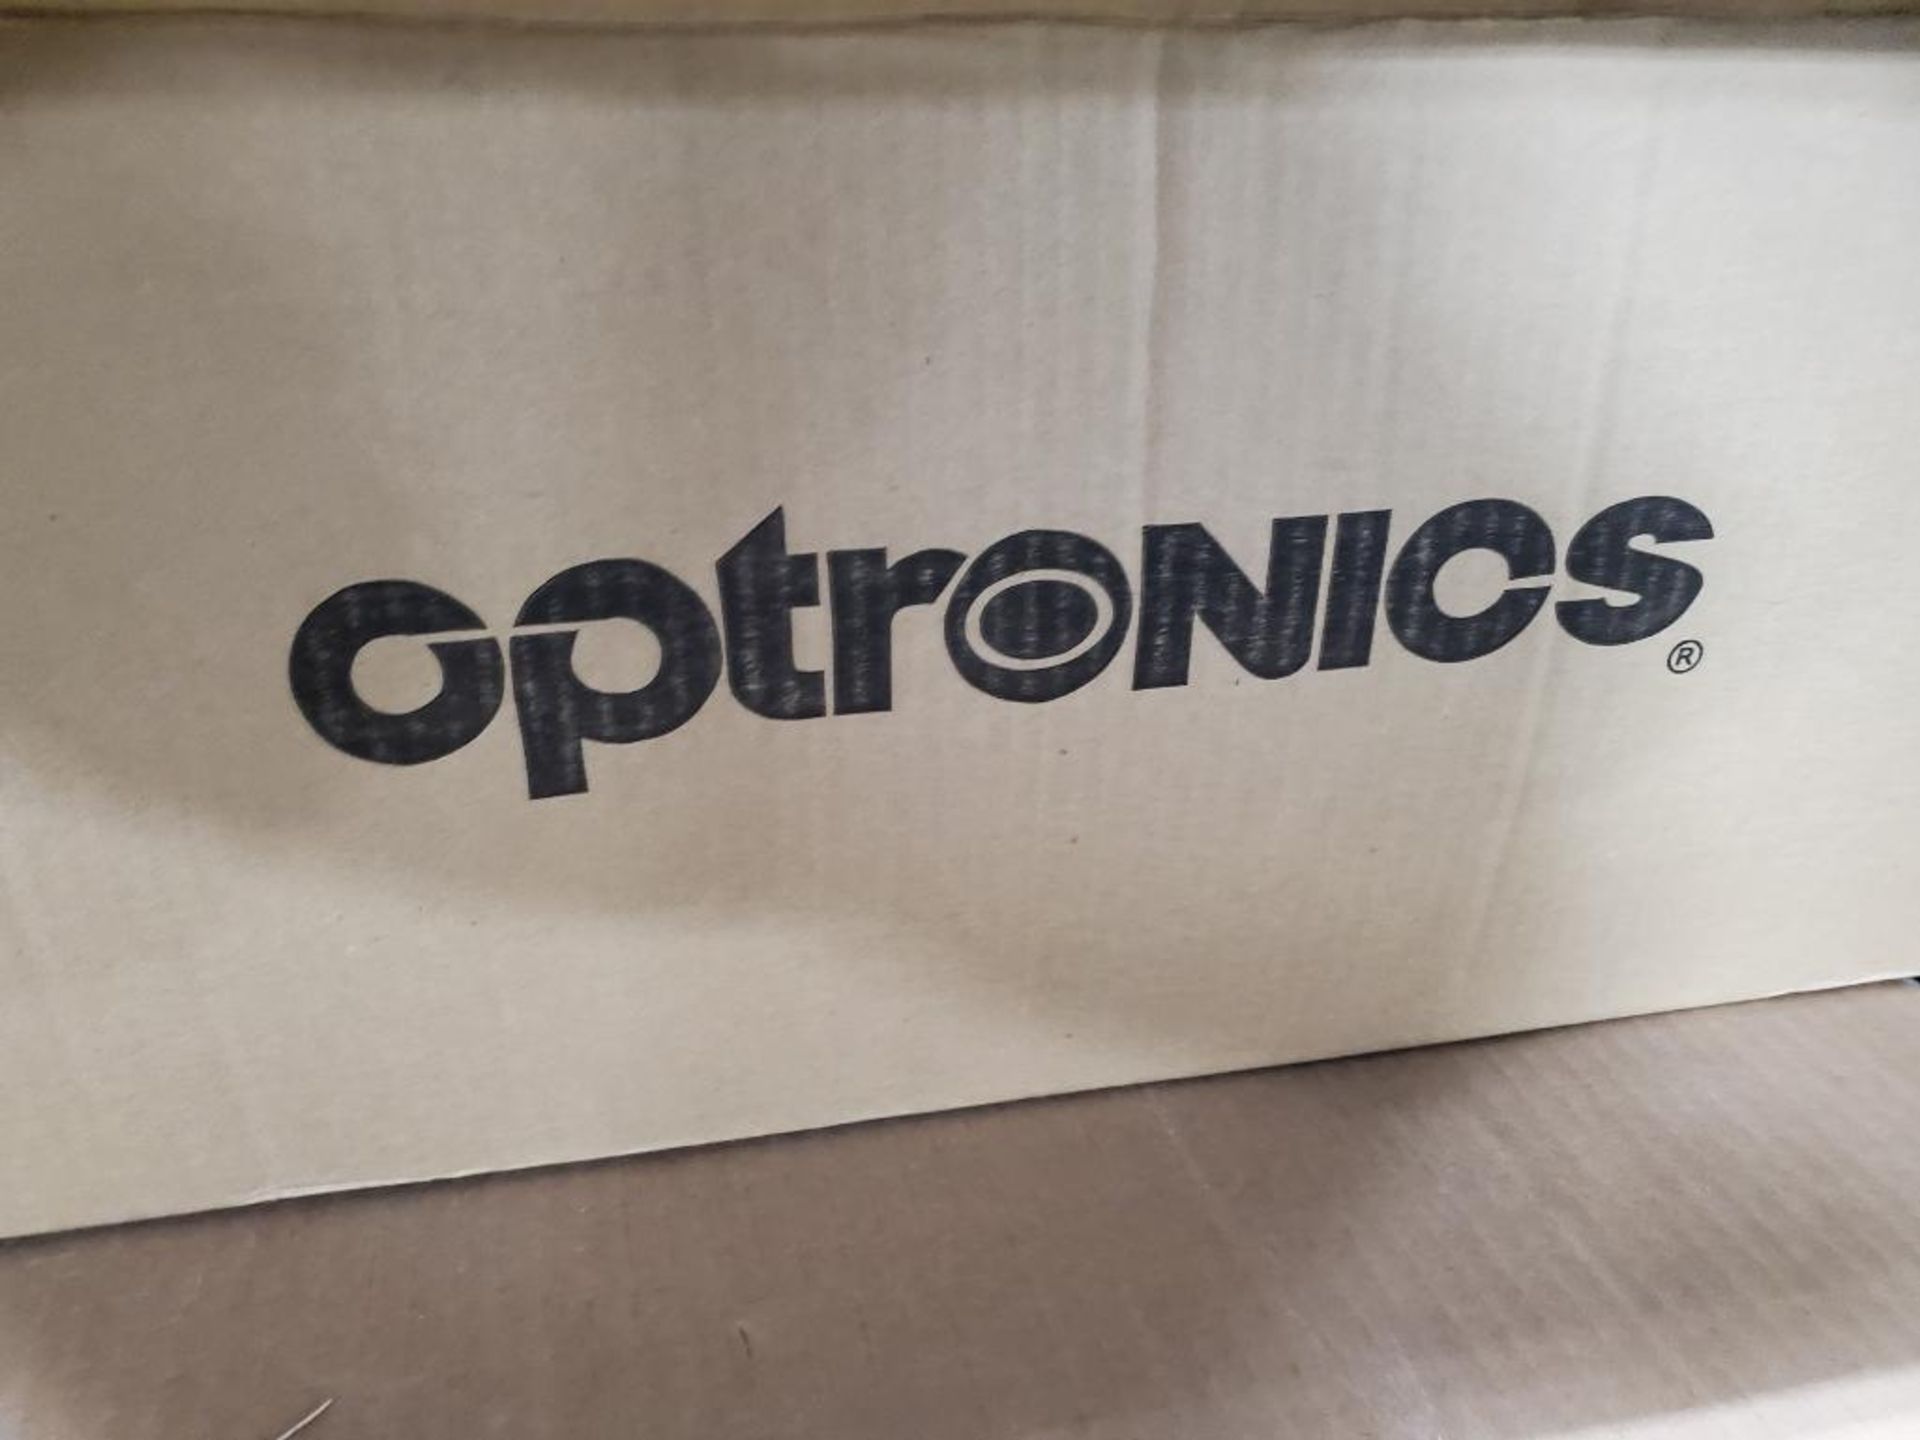 Qty 5 - Optronics light. Part number 17304030. - Image 5 of 6